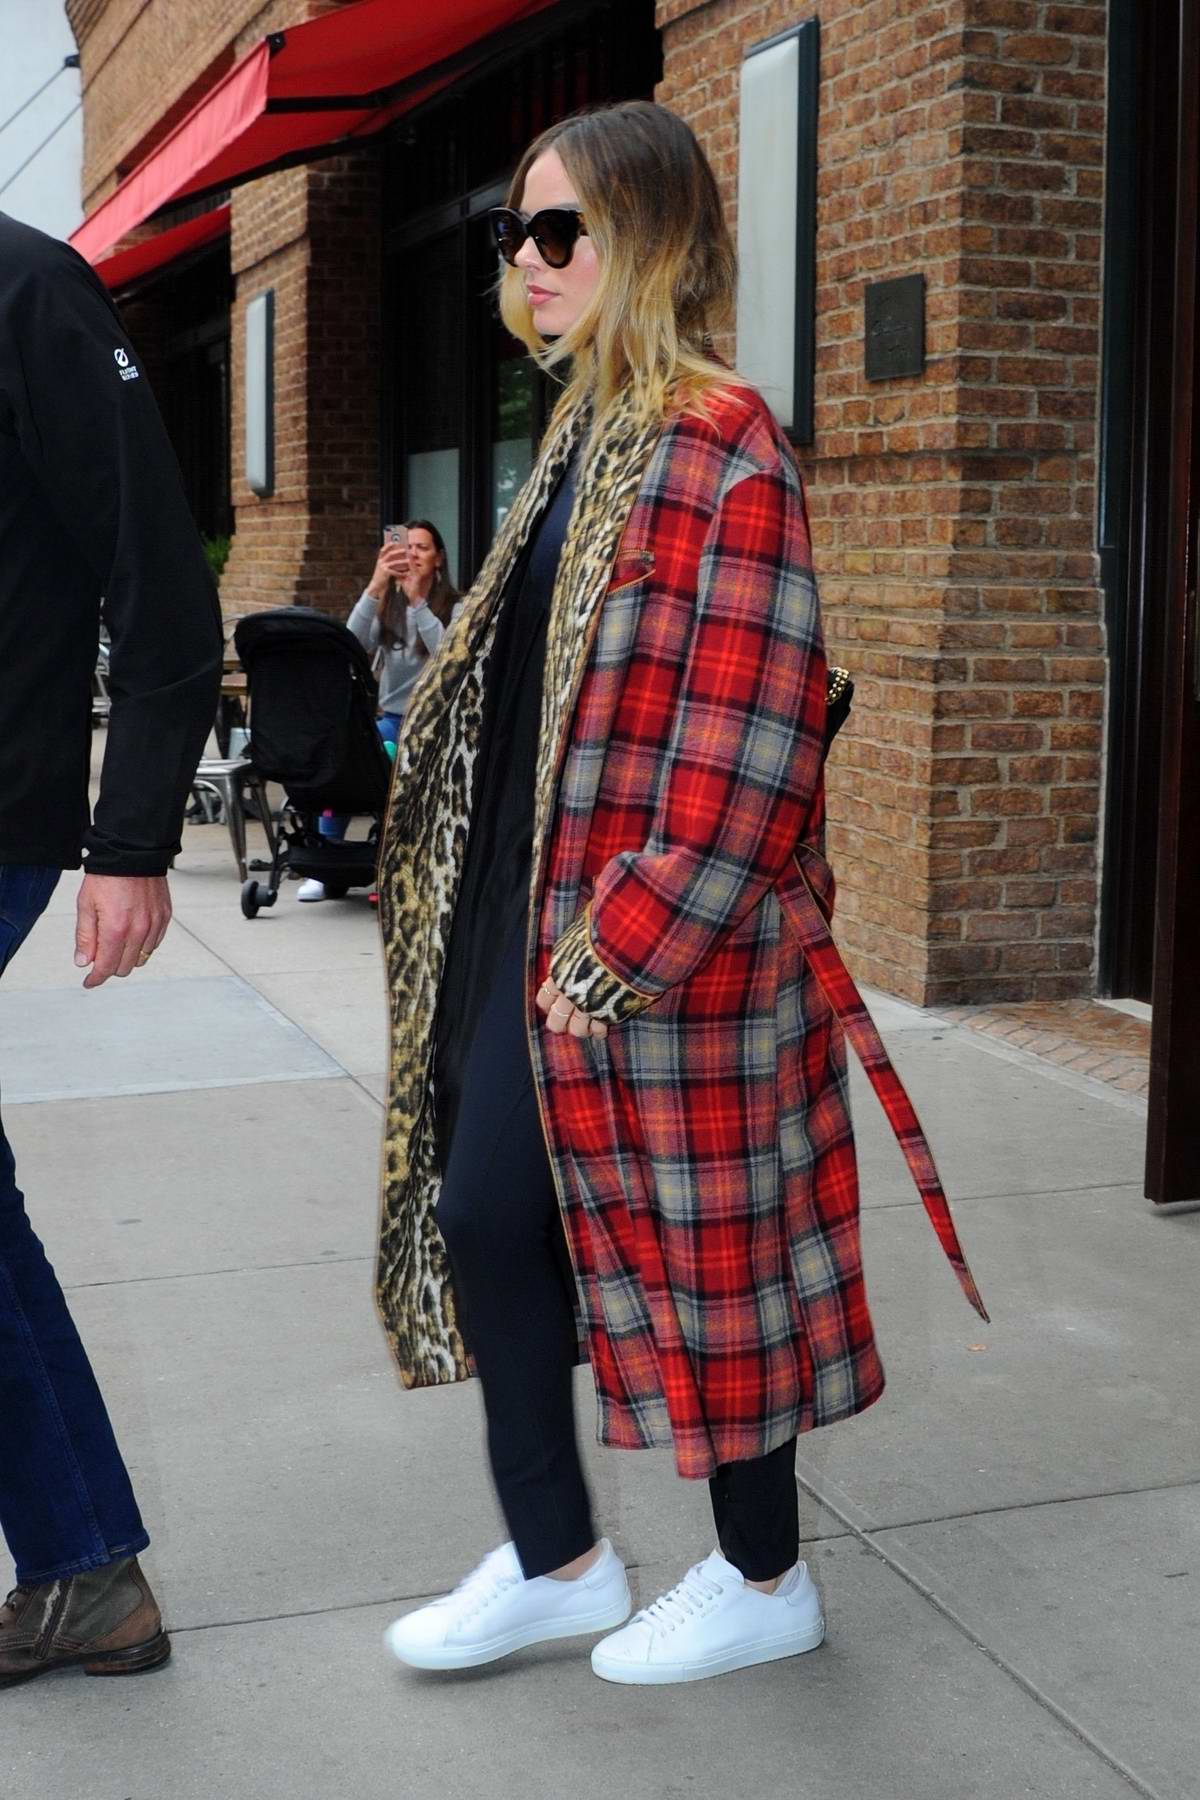 Margot Robbie Steps Out in a Crop Top & Plaid Coat for the Day in